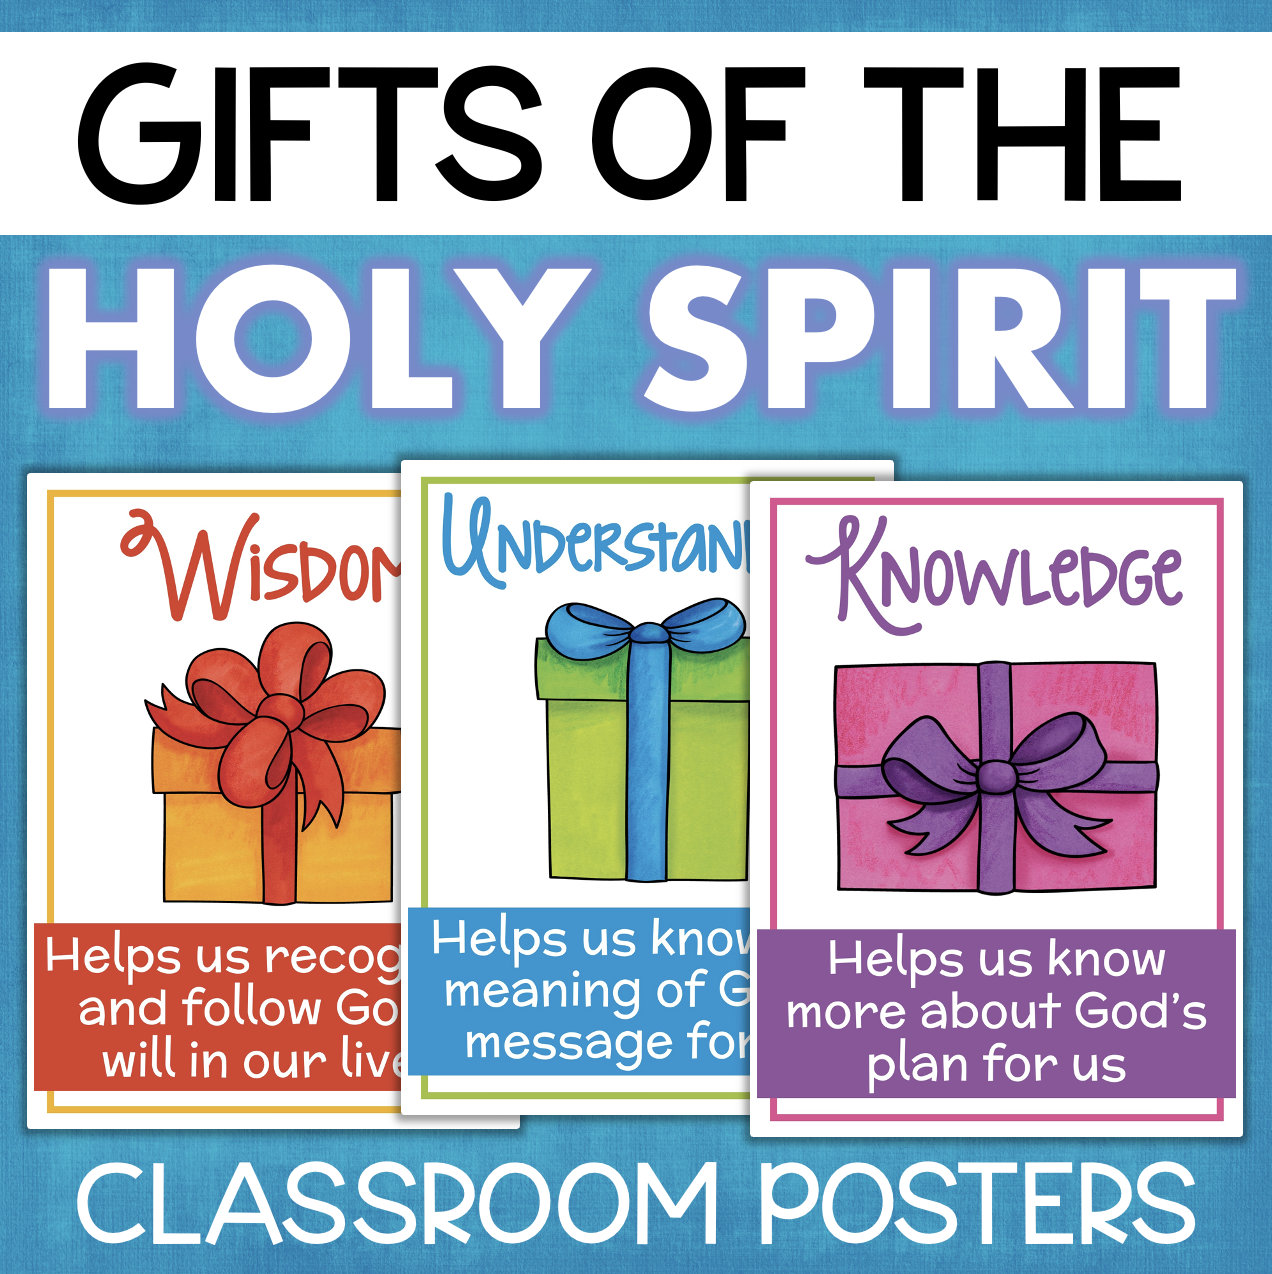 gifts of the holy spirit poster